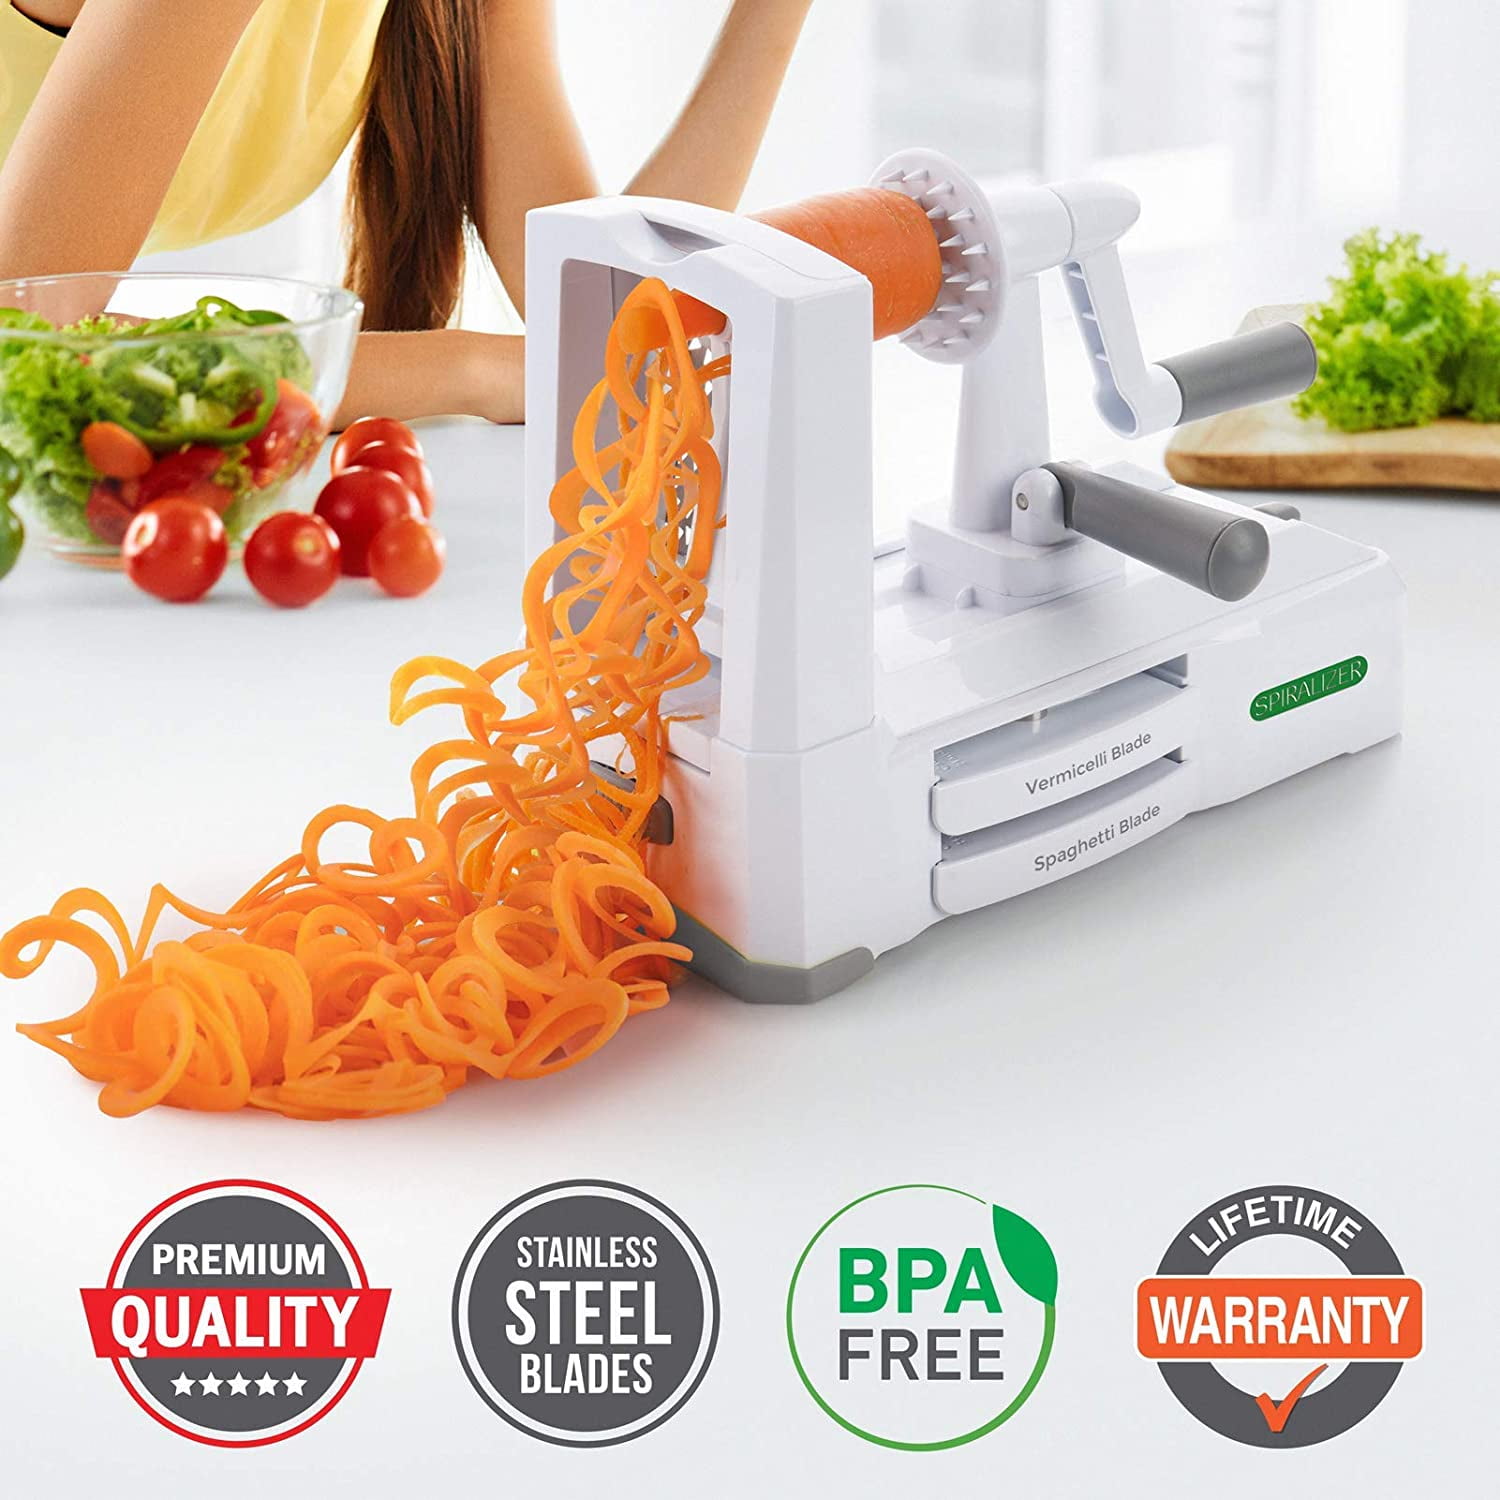 The Vegetable Spiralizer Cookbook: 101 Gluten-Free, Paleo & Low Carb  Recipes to Help You Lose Weight & Get Healthy Using Vegetable Pasta  Spiralizer – for Paderno, Veggetti & Spaghetti Shredders by Laura